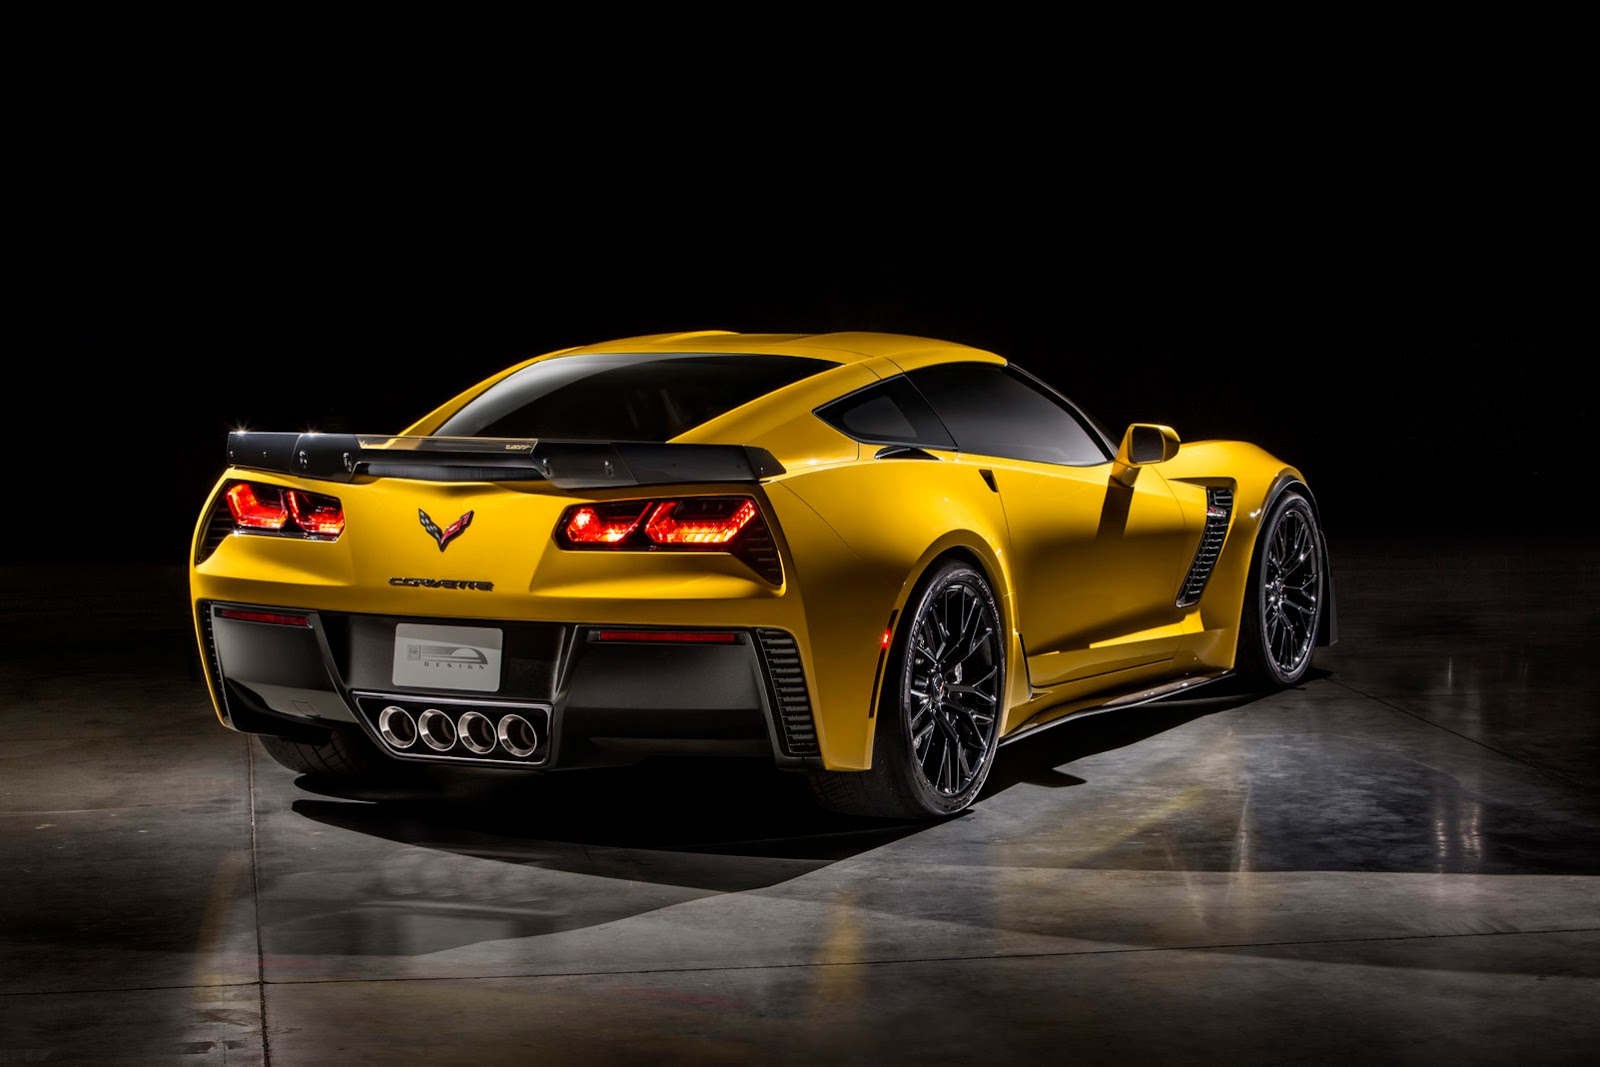 Corvette Z06 Has 625hp Is Faster Than C6 Zr1 On The